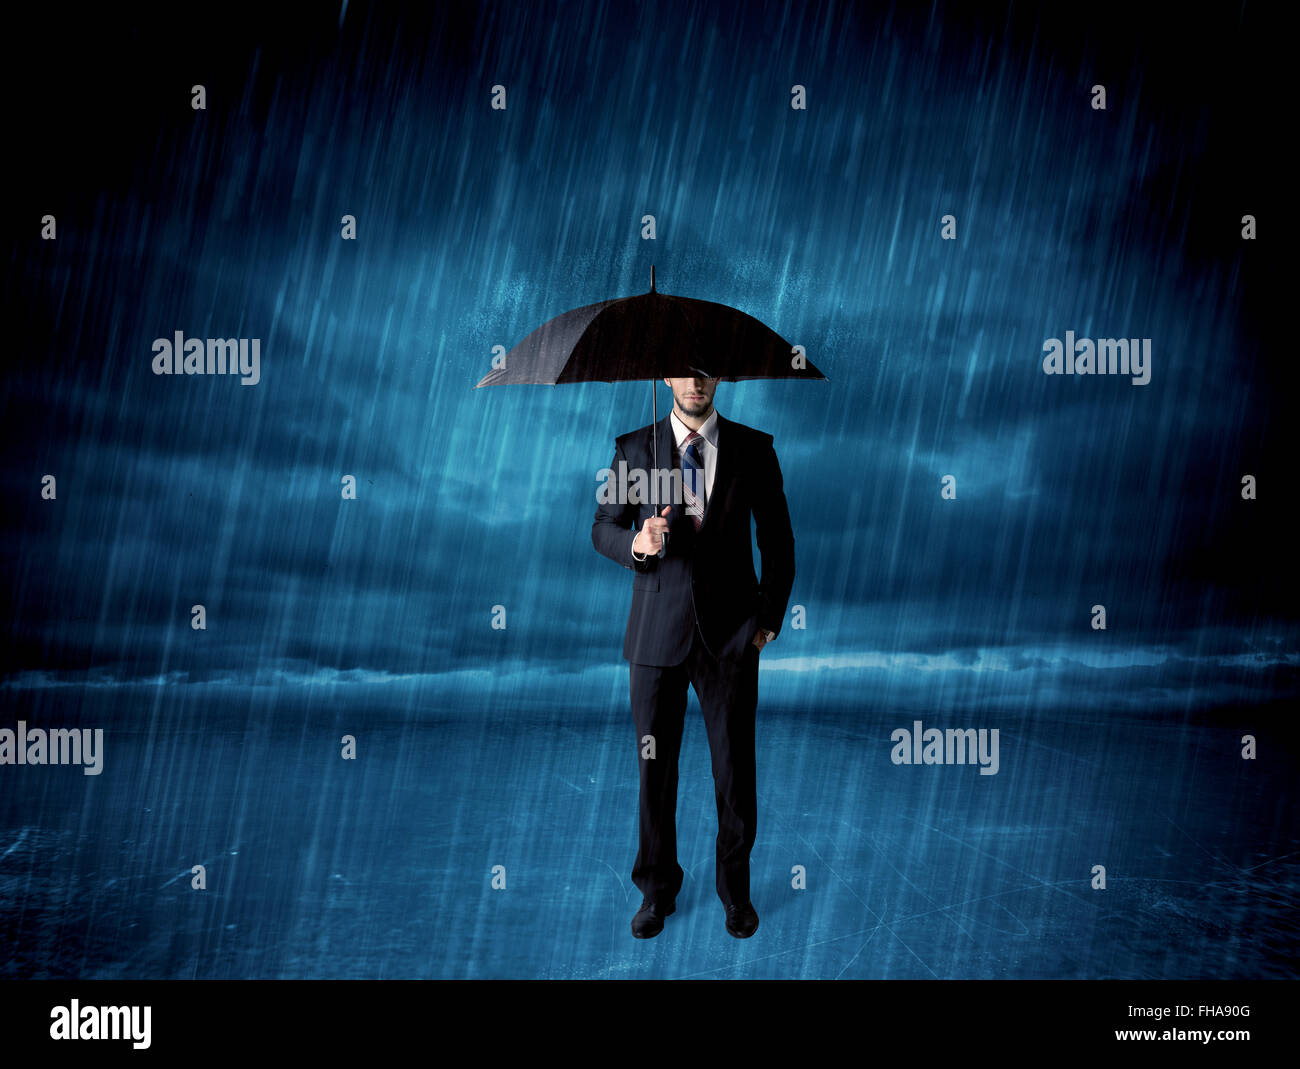 Business man standing in rain with an umbrella Stock Photo